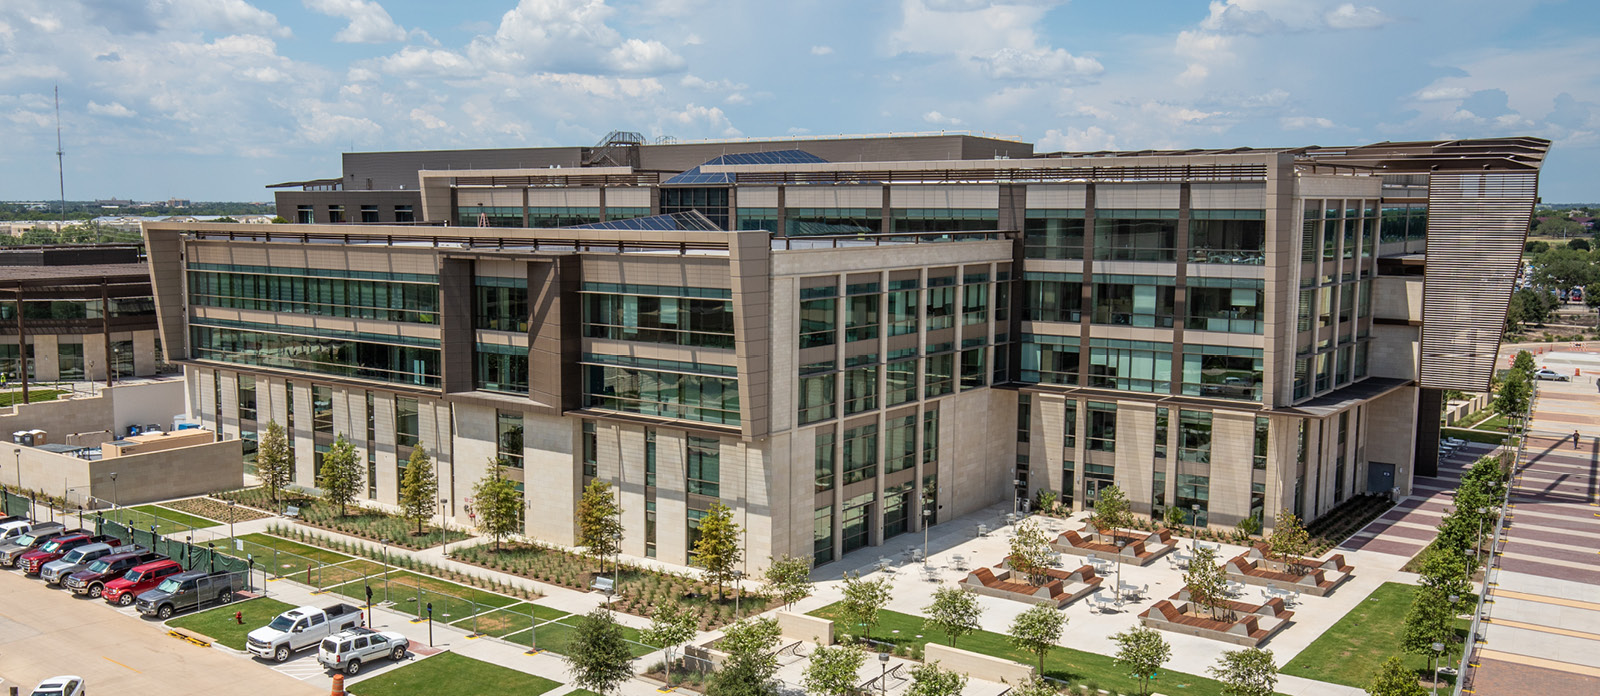 Overhead view of Zachry Engineering Building